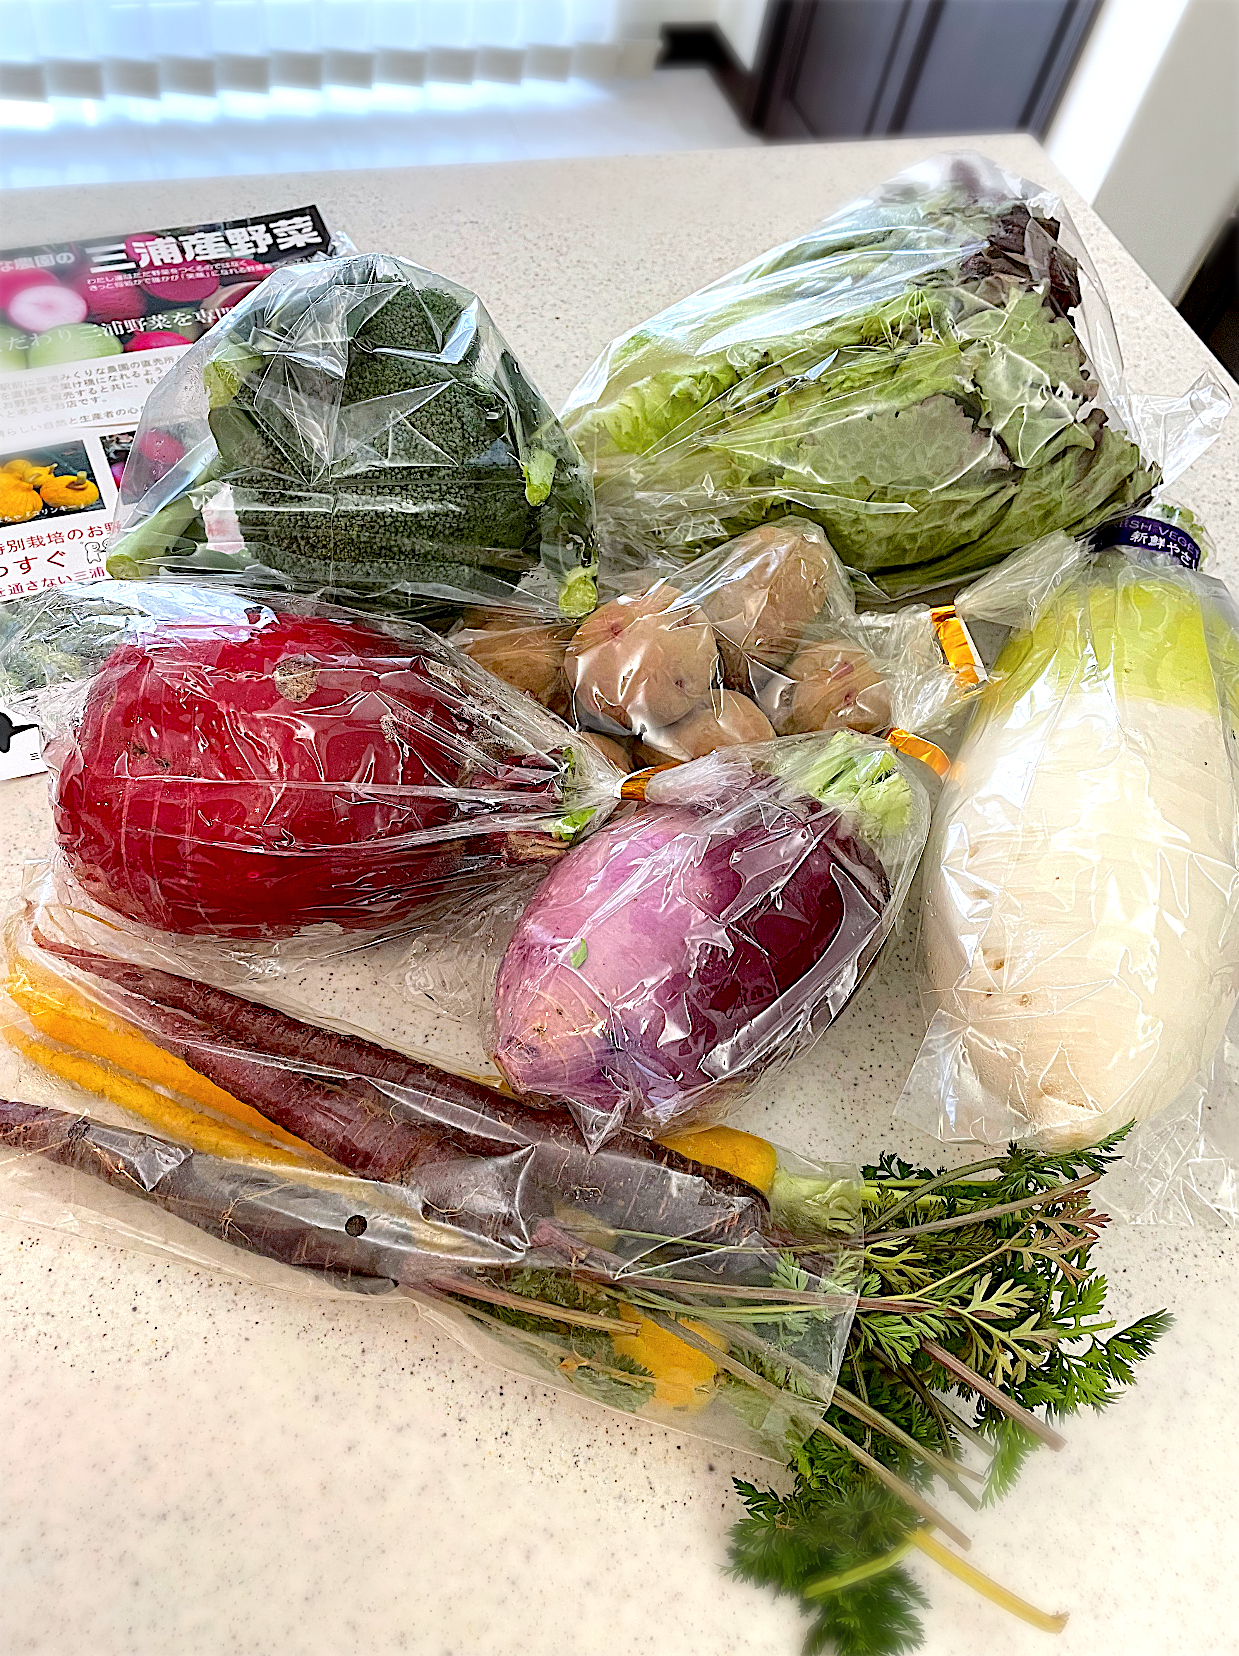 🌺Foodieさん🌺から三浦野菜届いたよ🥦🥕🥔